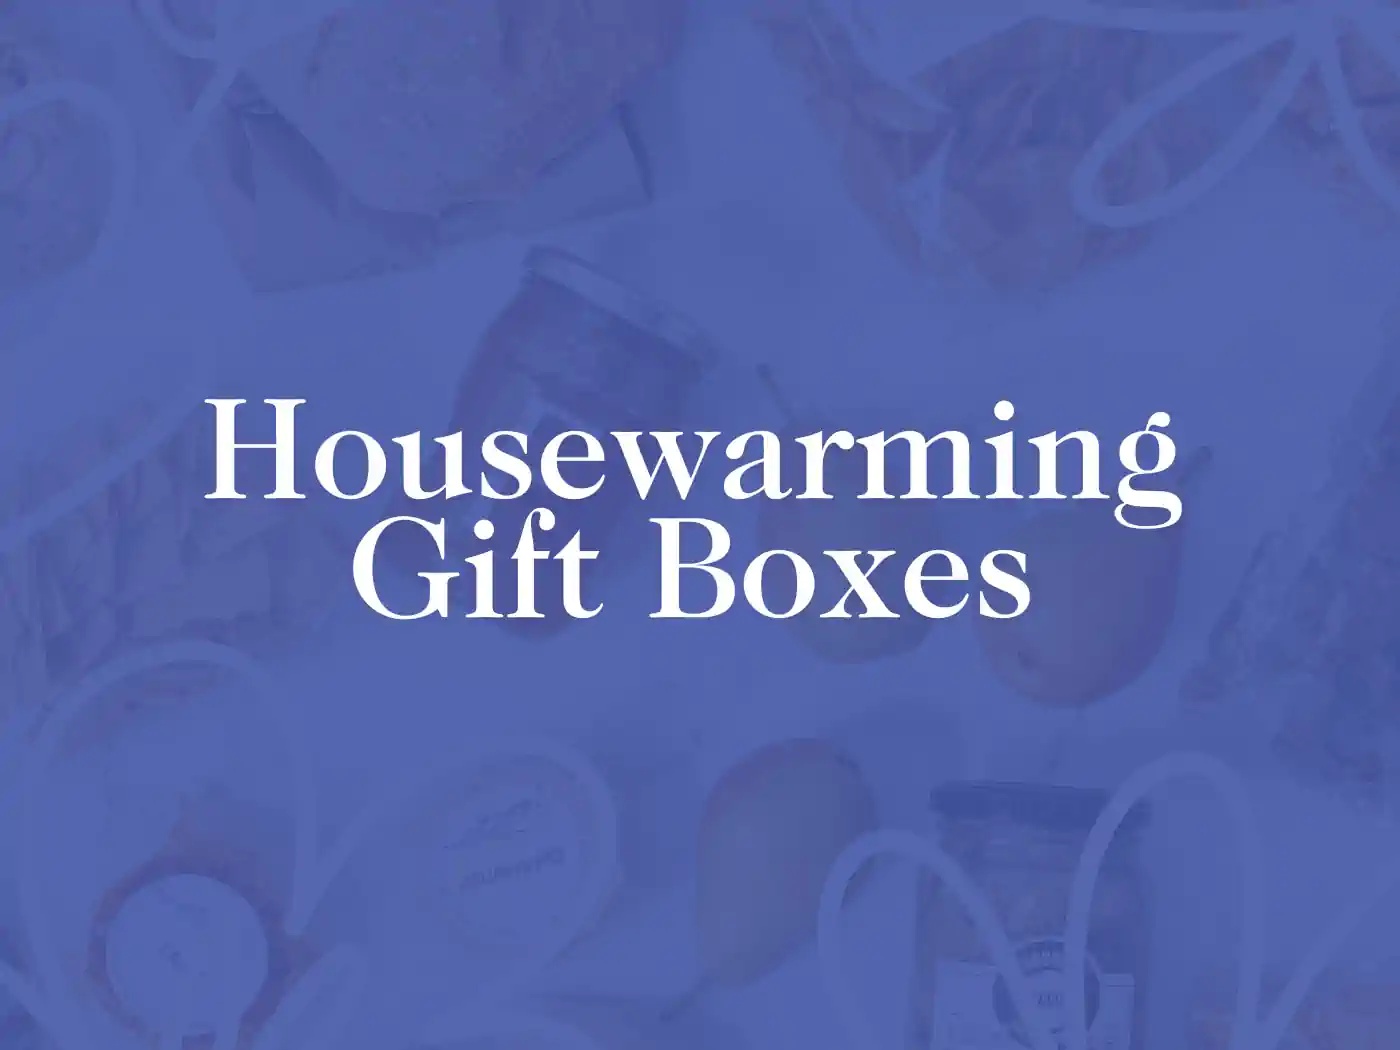 Promotional image for housewarming gift boxes, featuring a soft blue background with a faint collage of various gift items and the bold text 'Housewarming Gift Boxes' prominently displayed. Ideal for celebrating a new home. Fabulous Flowers and Gifts.